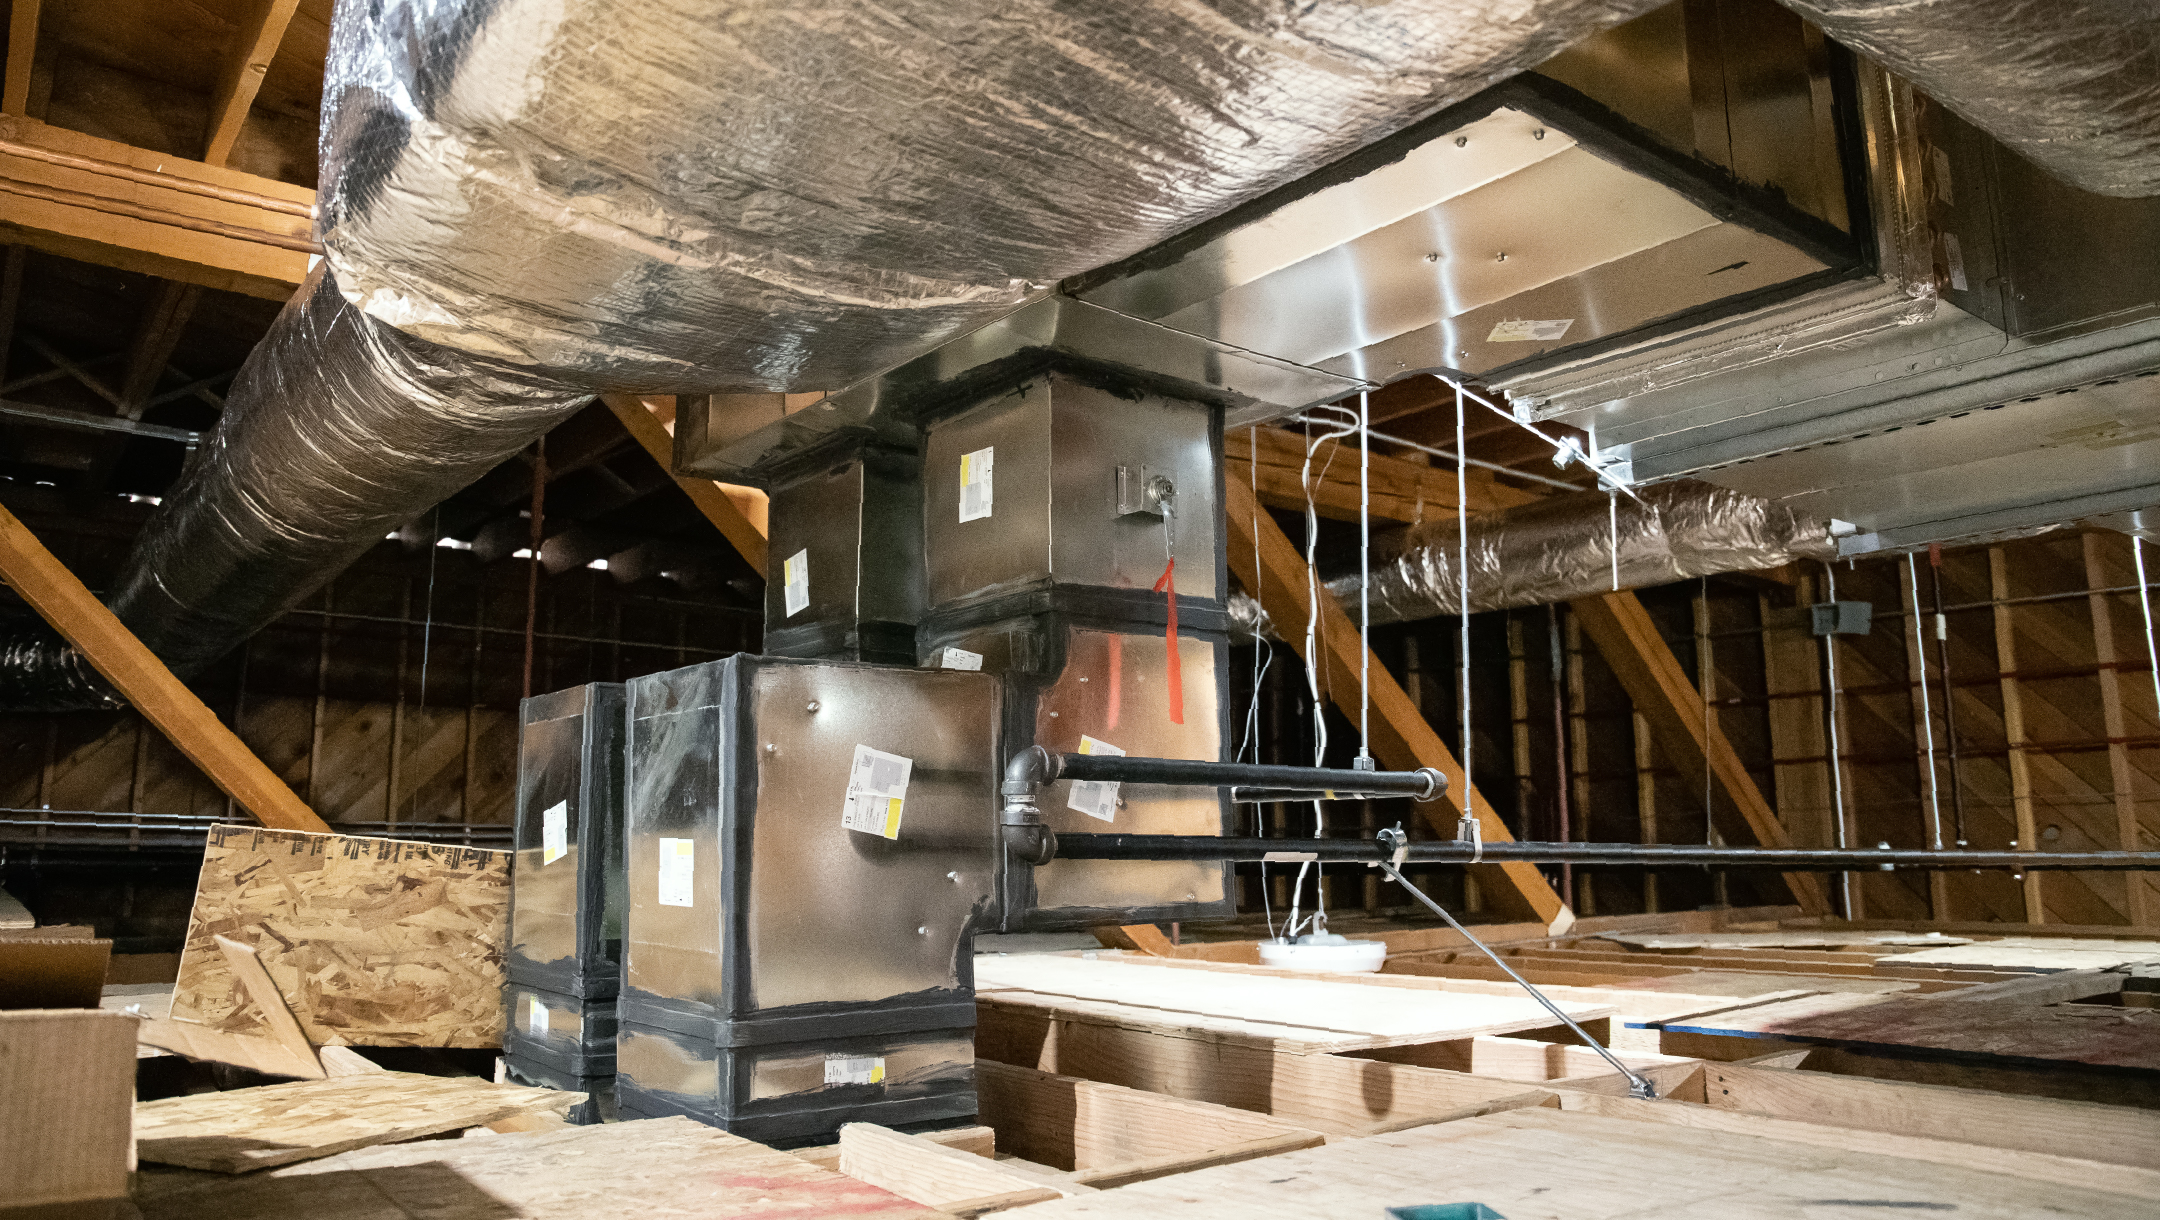 Photo of HVAC duct work in commercial building under construction in Klamath Falls